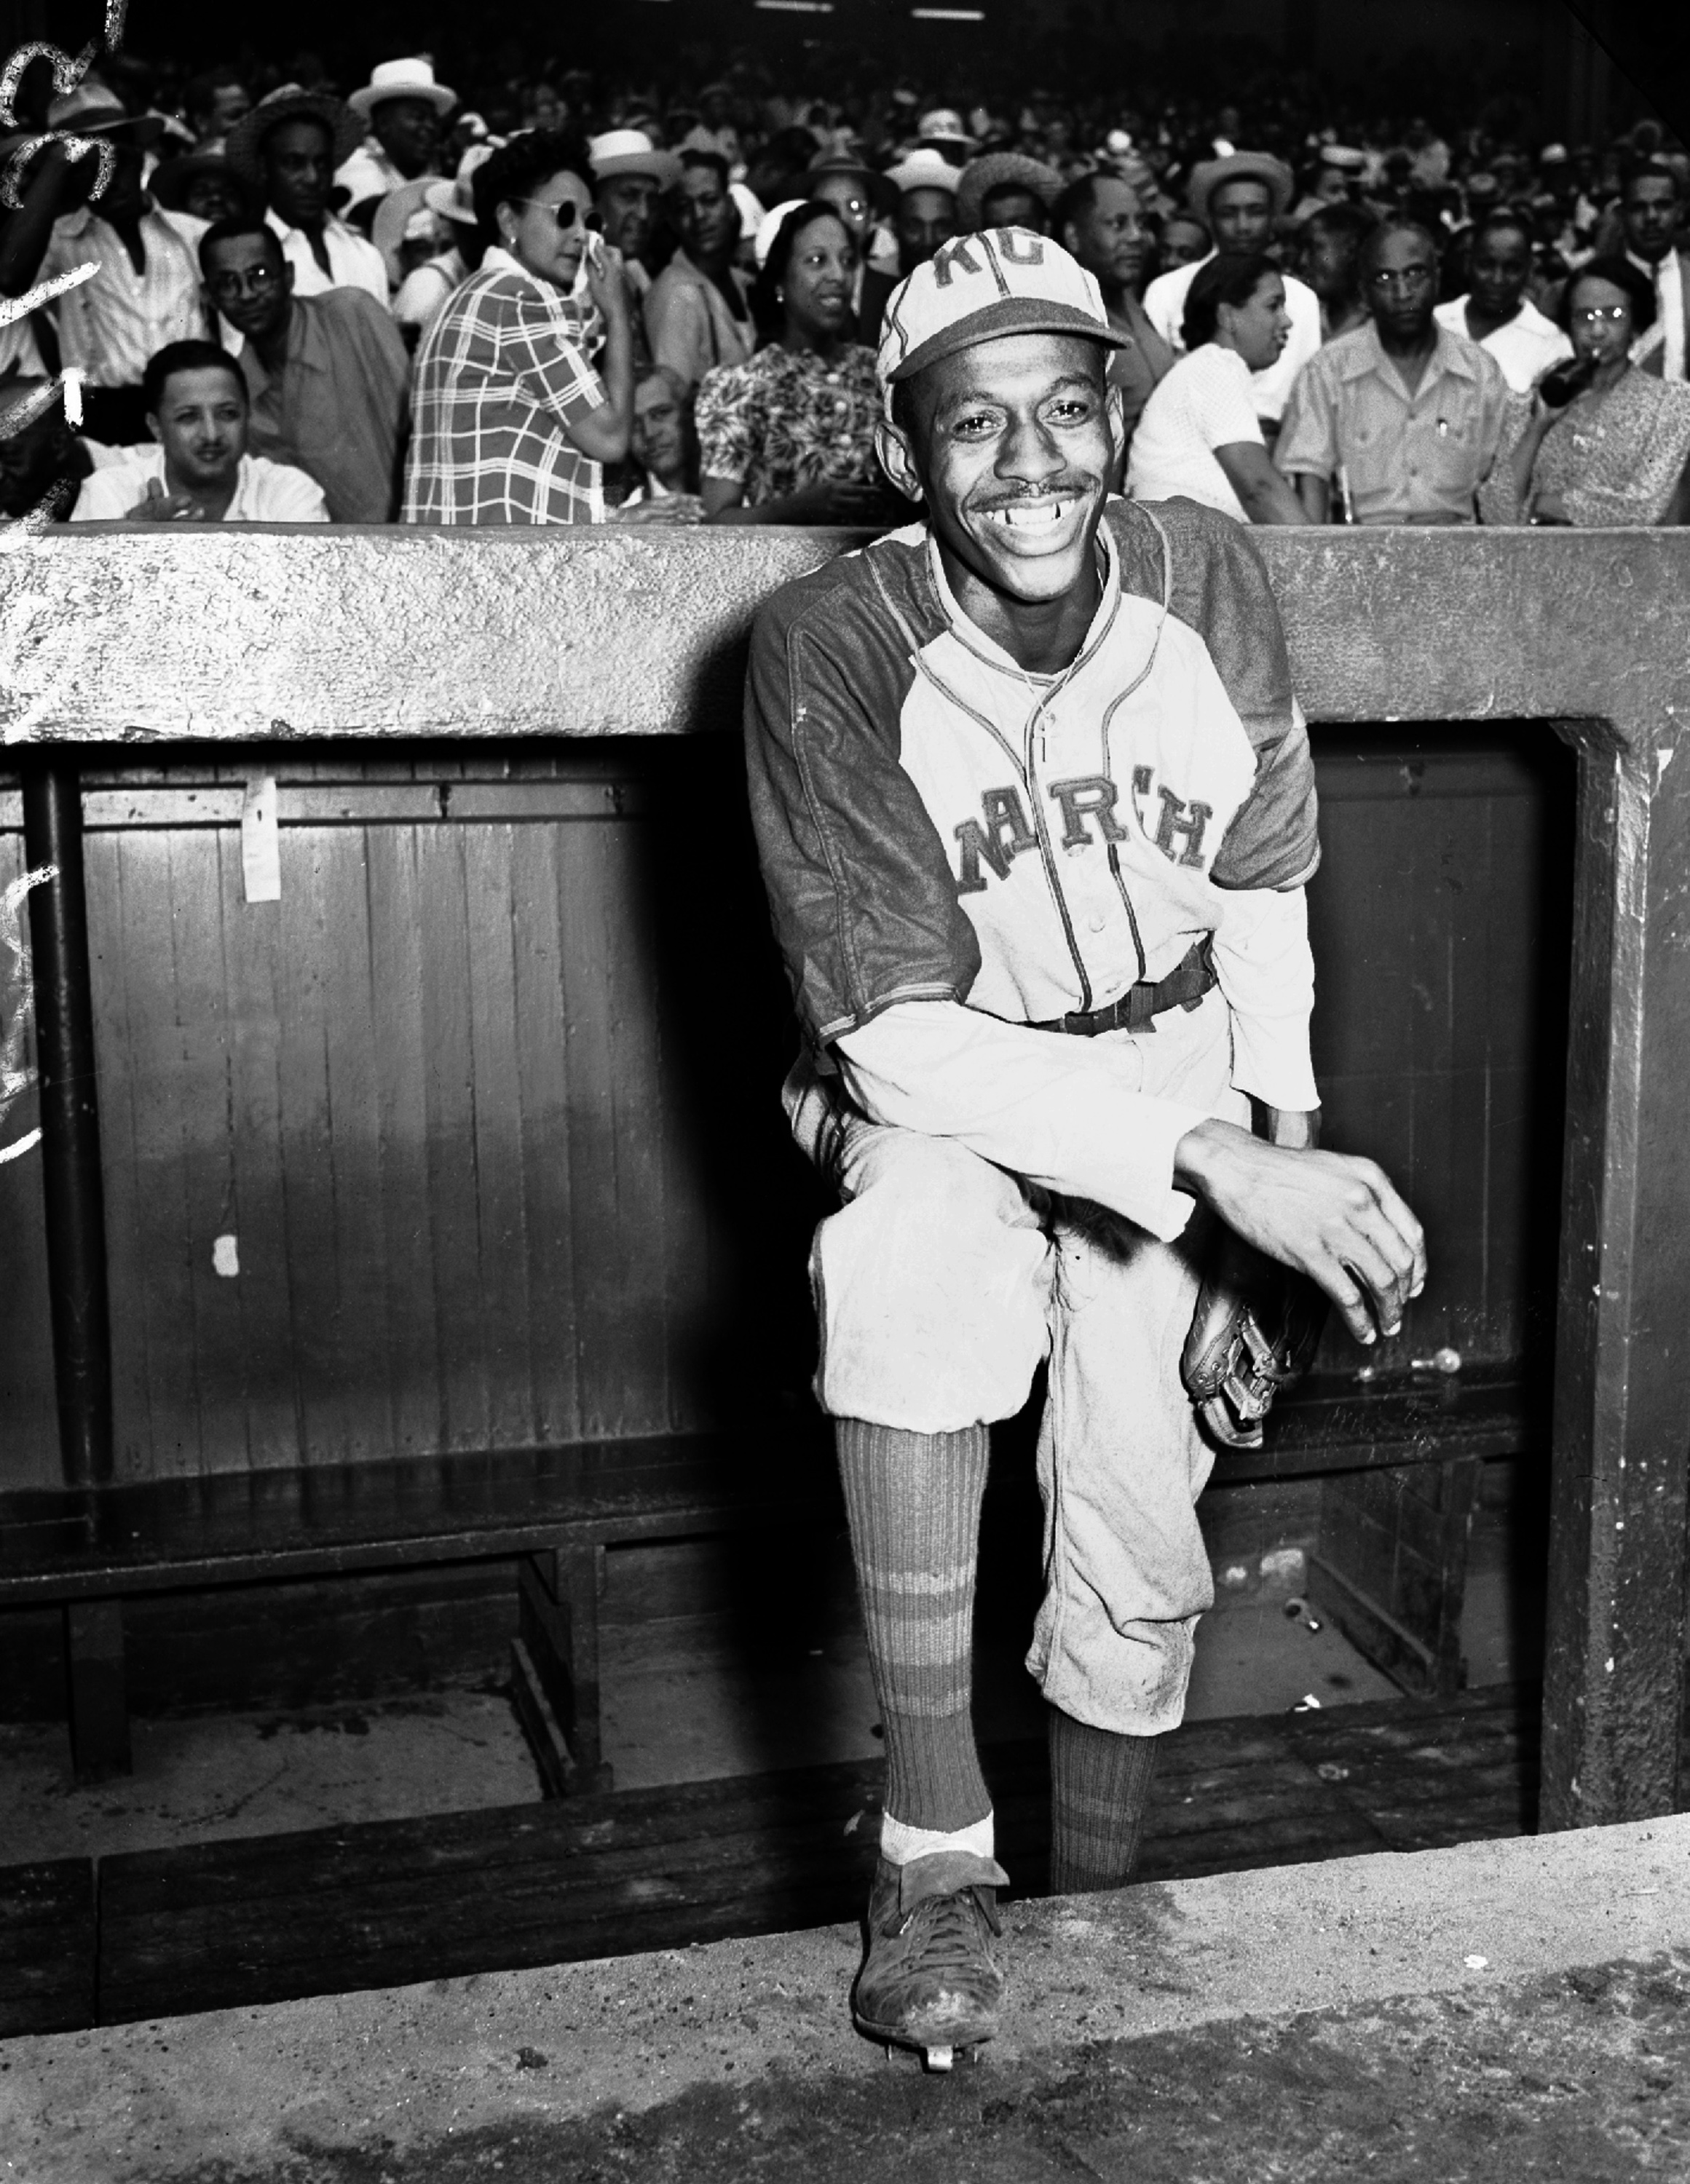 Kansas City Monarchs pitching great Satchel Paige is all smiles as he poses in the dugout at New York's Yankee Stadium on Aug. 2, 1942, for a Negro League game between the Monarchs and the New York Cuban Stars. Paige was considered a top prospect for the major leagues after baseball's commissioner ruled that there were no provisions barring players of color from the majors.